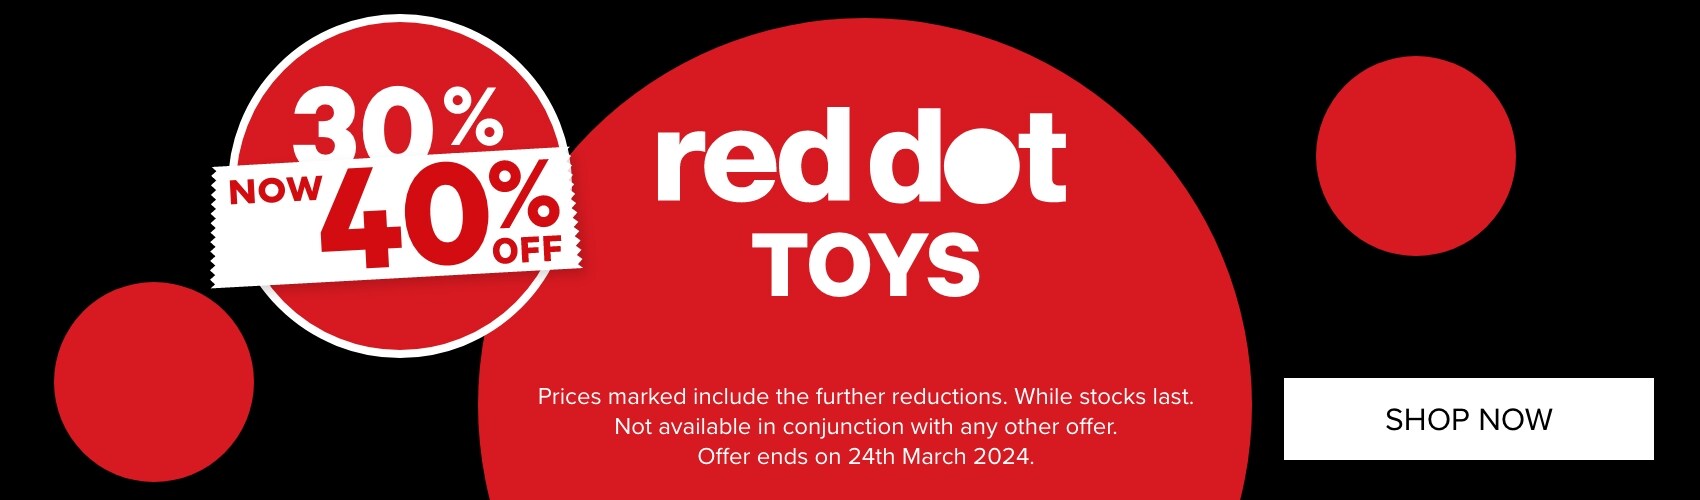 40% OFF Red Dot Toys